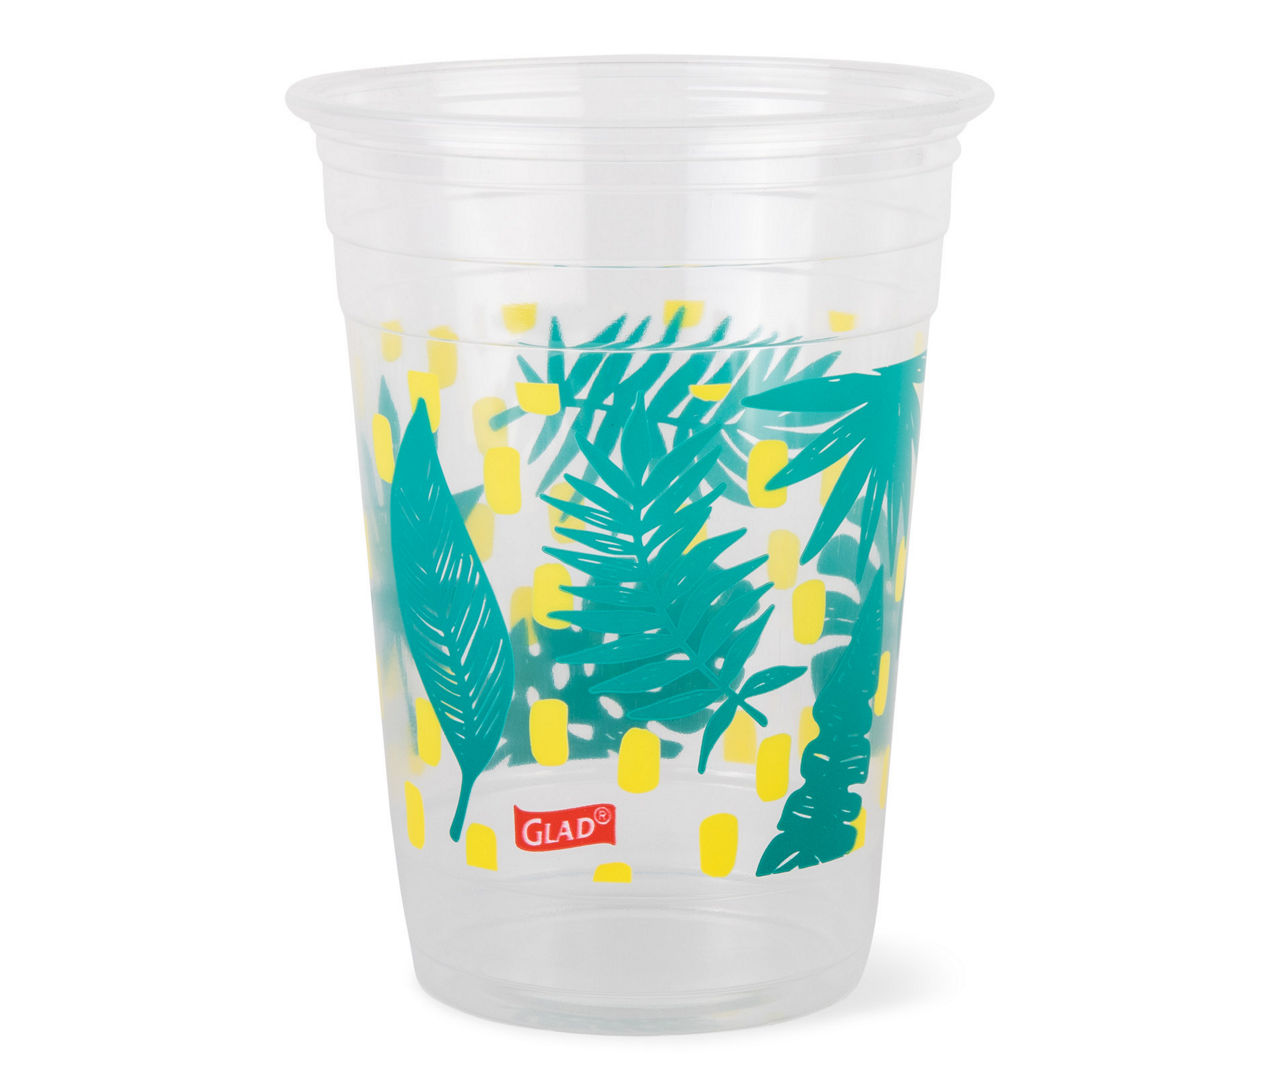 Big Lots! Party Cups, Everyday, Plastic, 18 Ounce - 120 cups